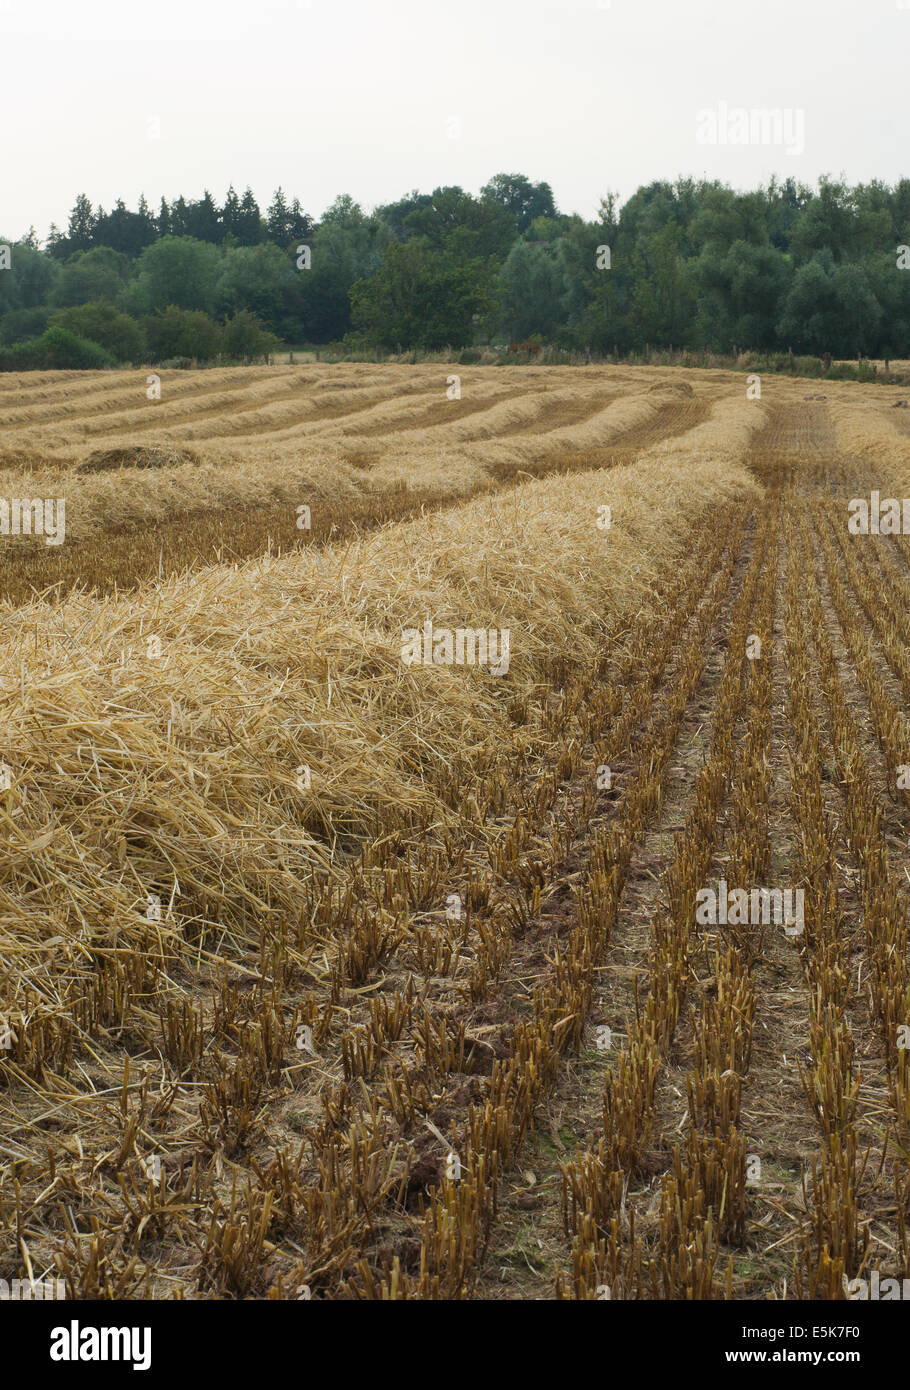 Windrows of straw Stock Photo